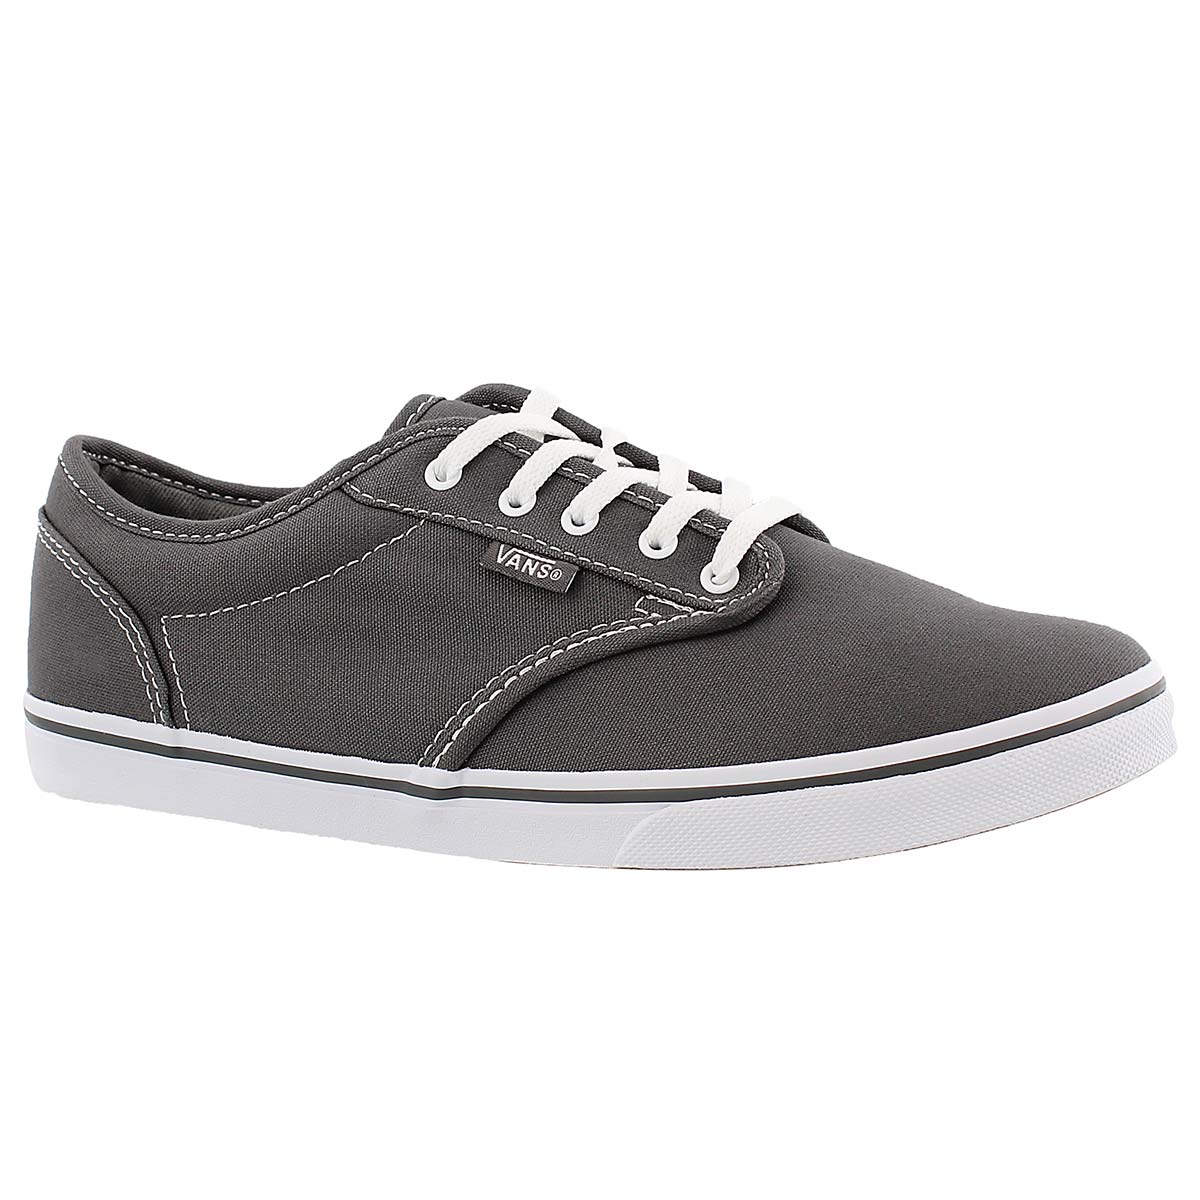 women's vans atwood low skate shoes